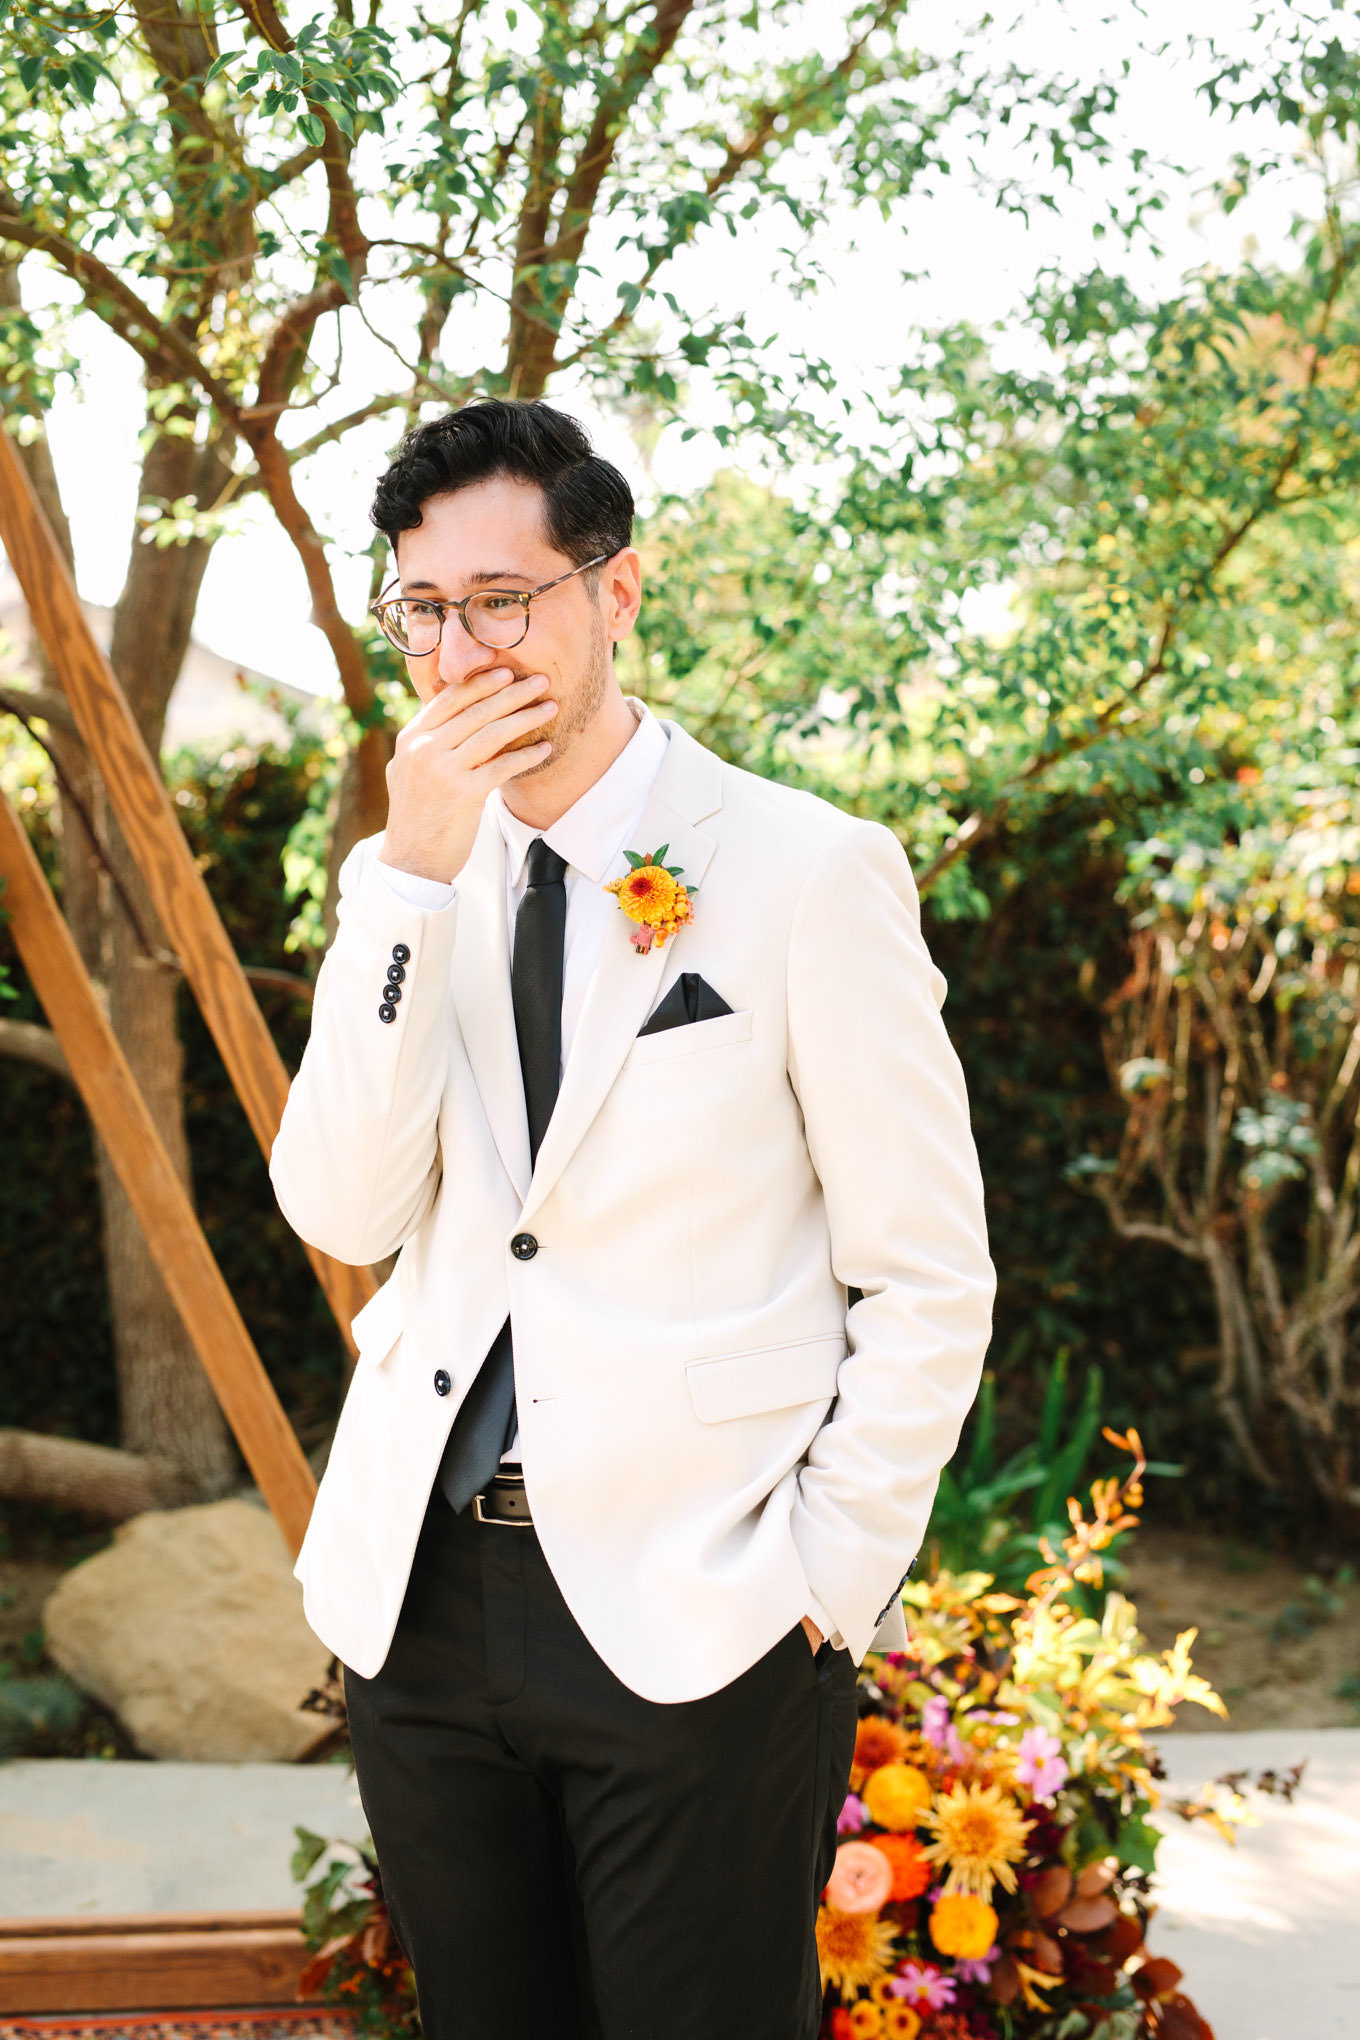 Groom reaction to bridal first look | Vibrant backyard micro wedding featured on Green Wedding Shoes | Colorful LA wedding photography | #losangeleswedding #backyardwedding #microwedding #laweddingphotographer Source: Mary Costa Photography | Los Angeles